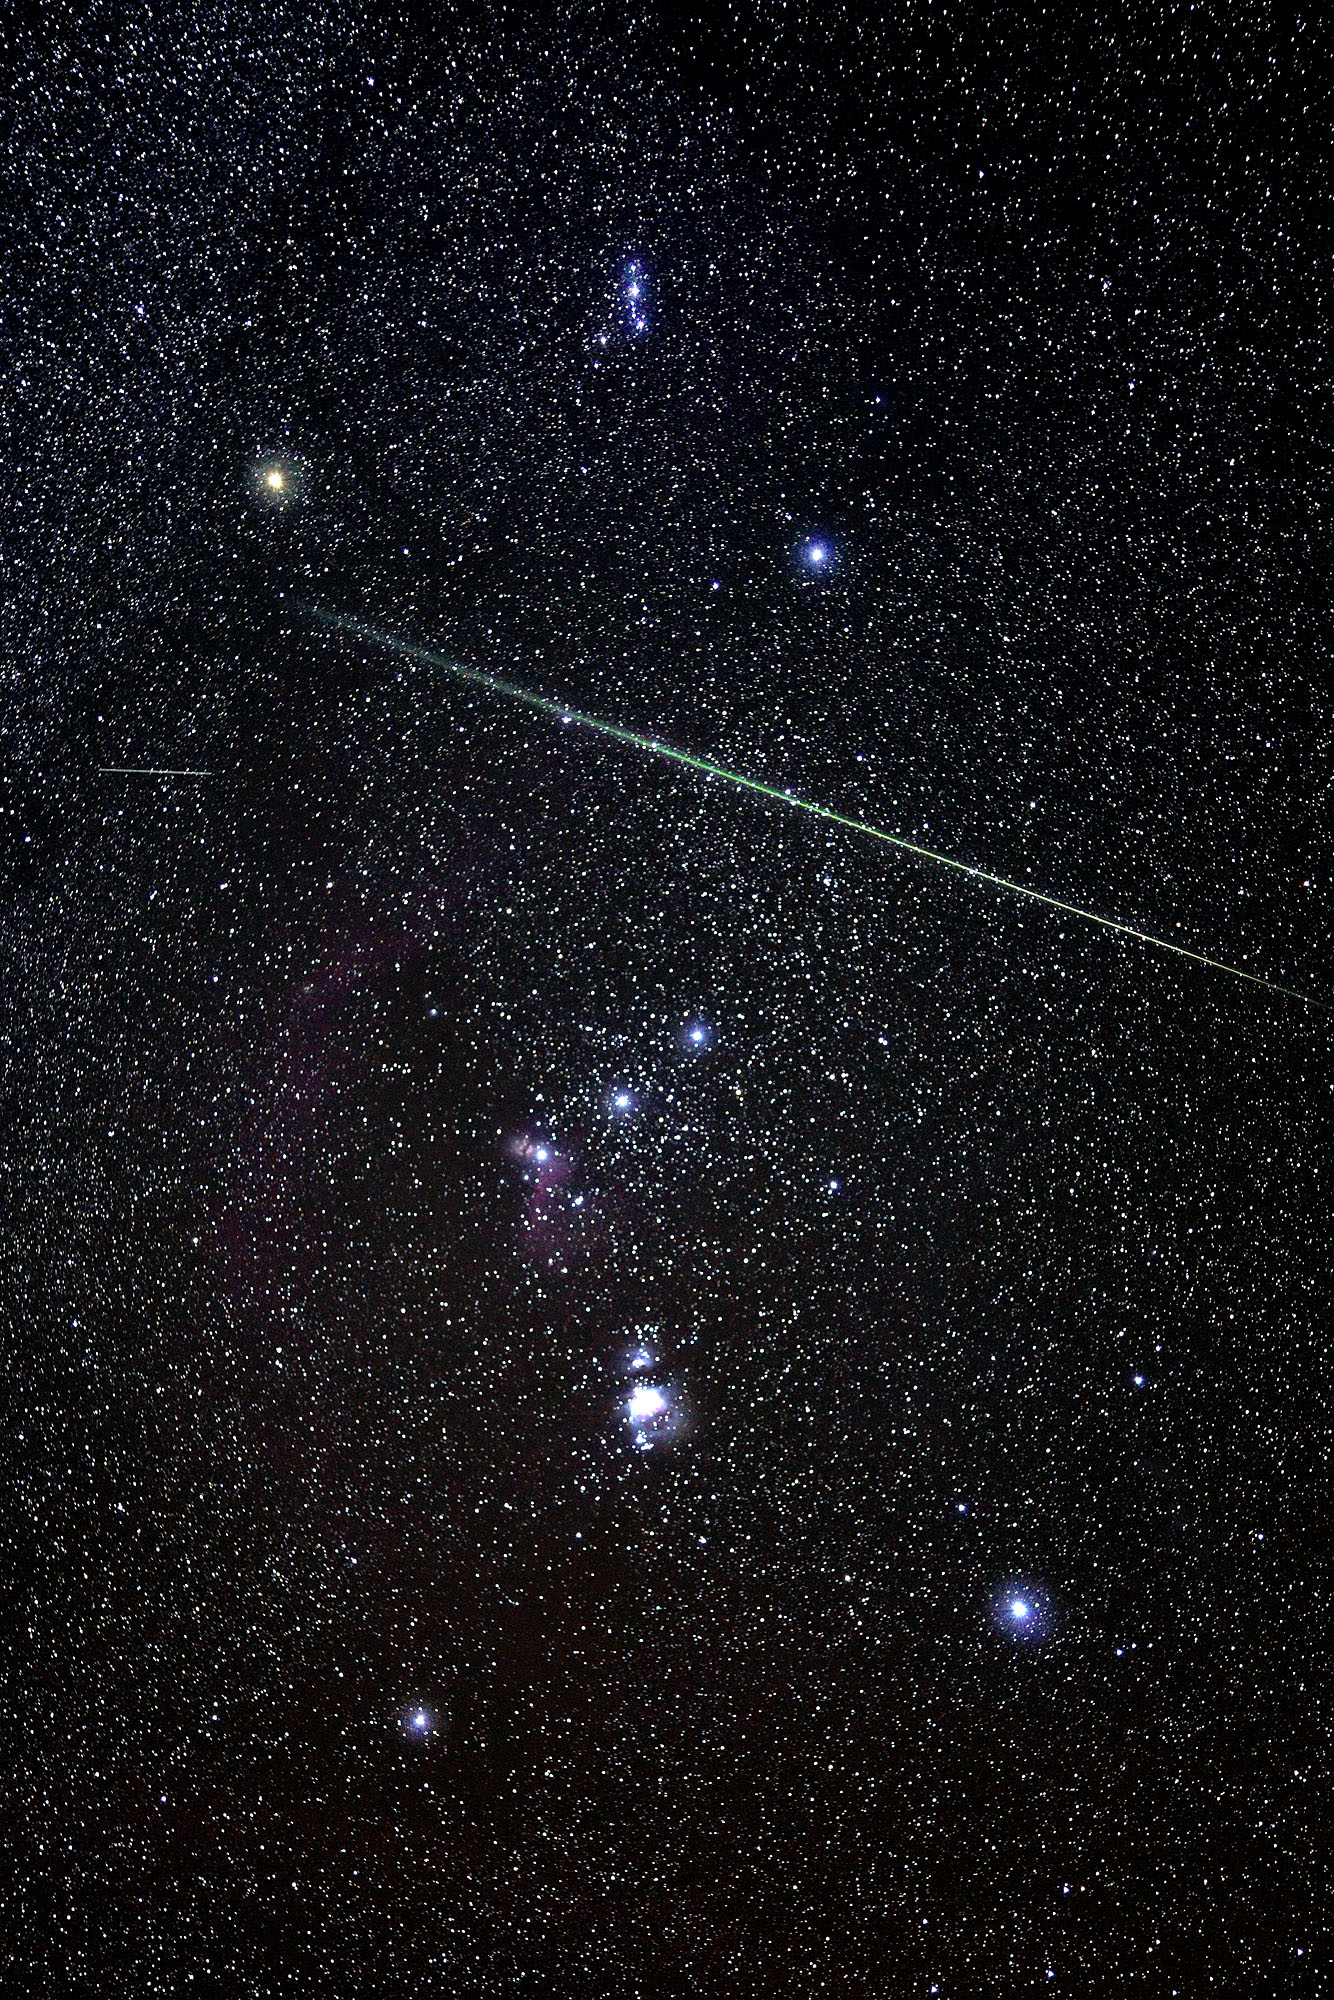 A bright Leonid shooting star falls through the Orion constellation with a bright green head and orange glowing trail